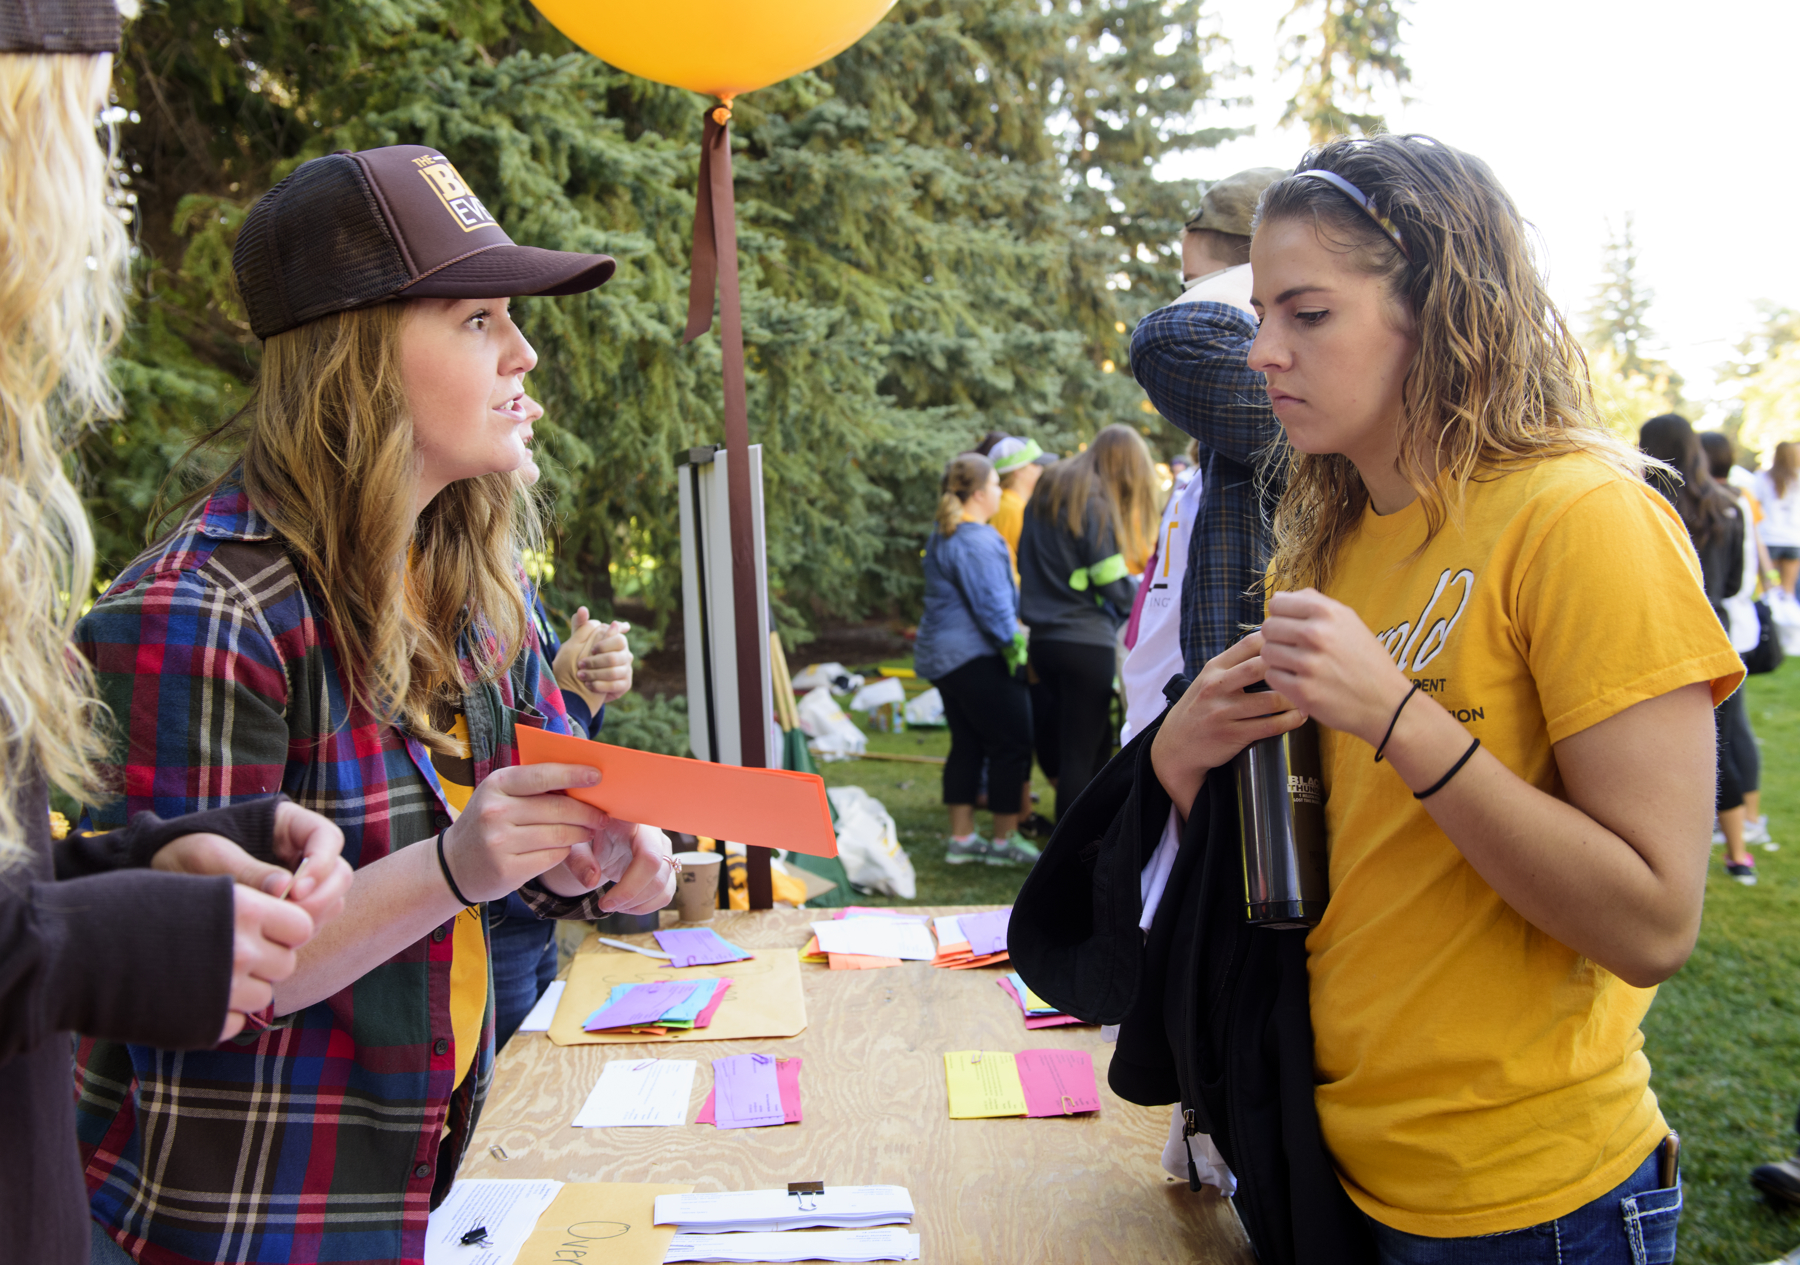 Students talking during an outside college event.